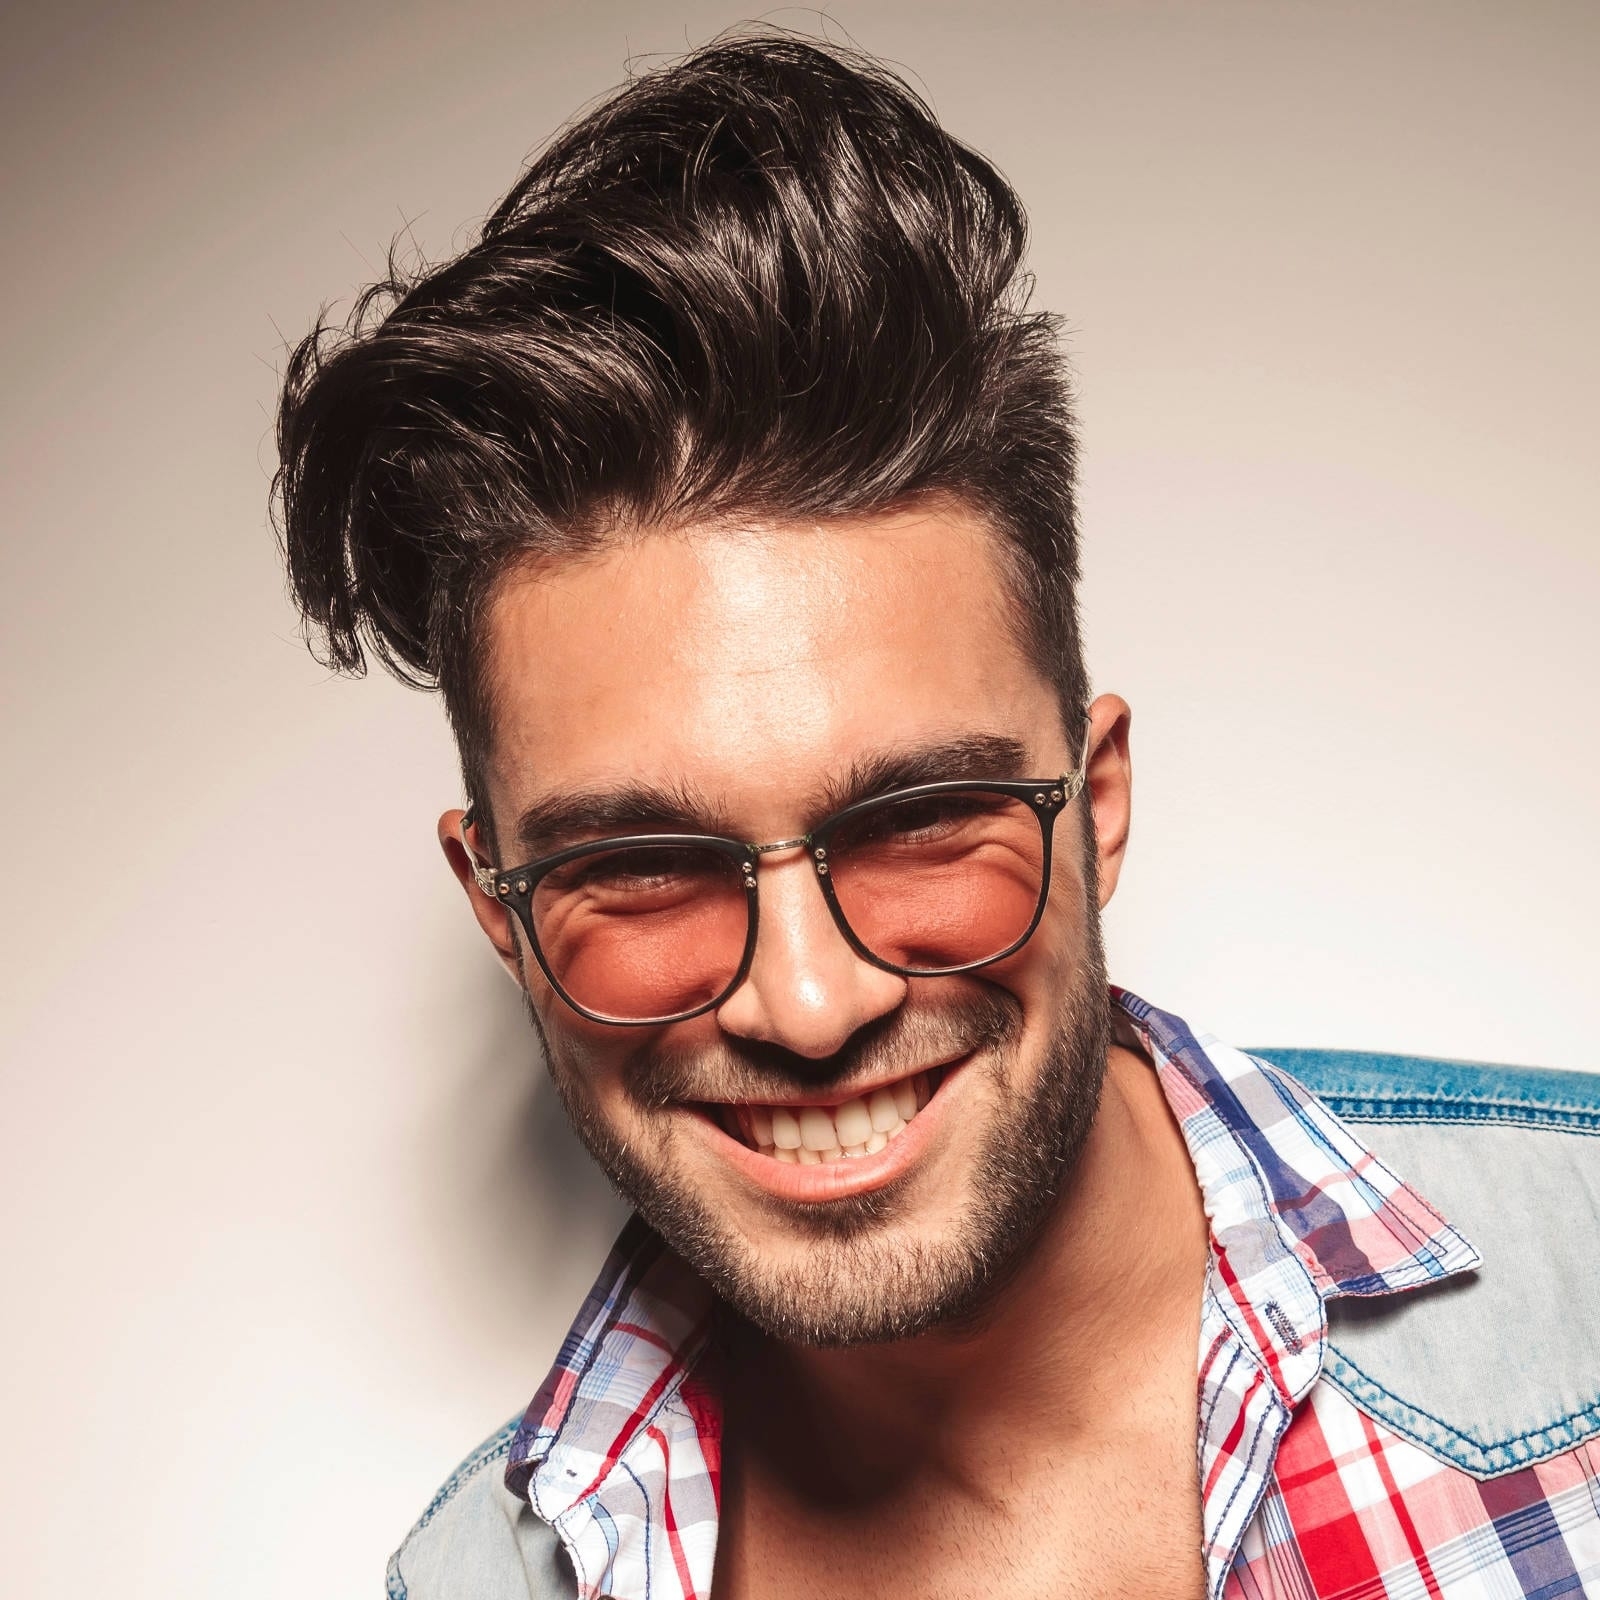 40 Favorite Haircuts For Men With Glasses: Find Your Perfect Style for Amazing Asian Hairstyle With Glasses